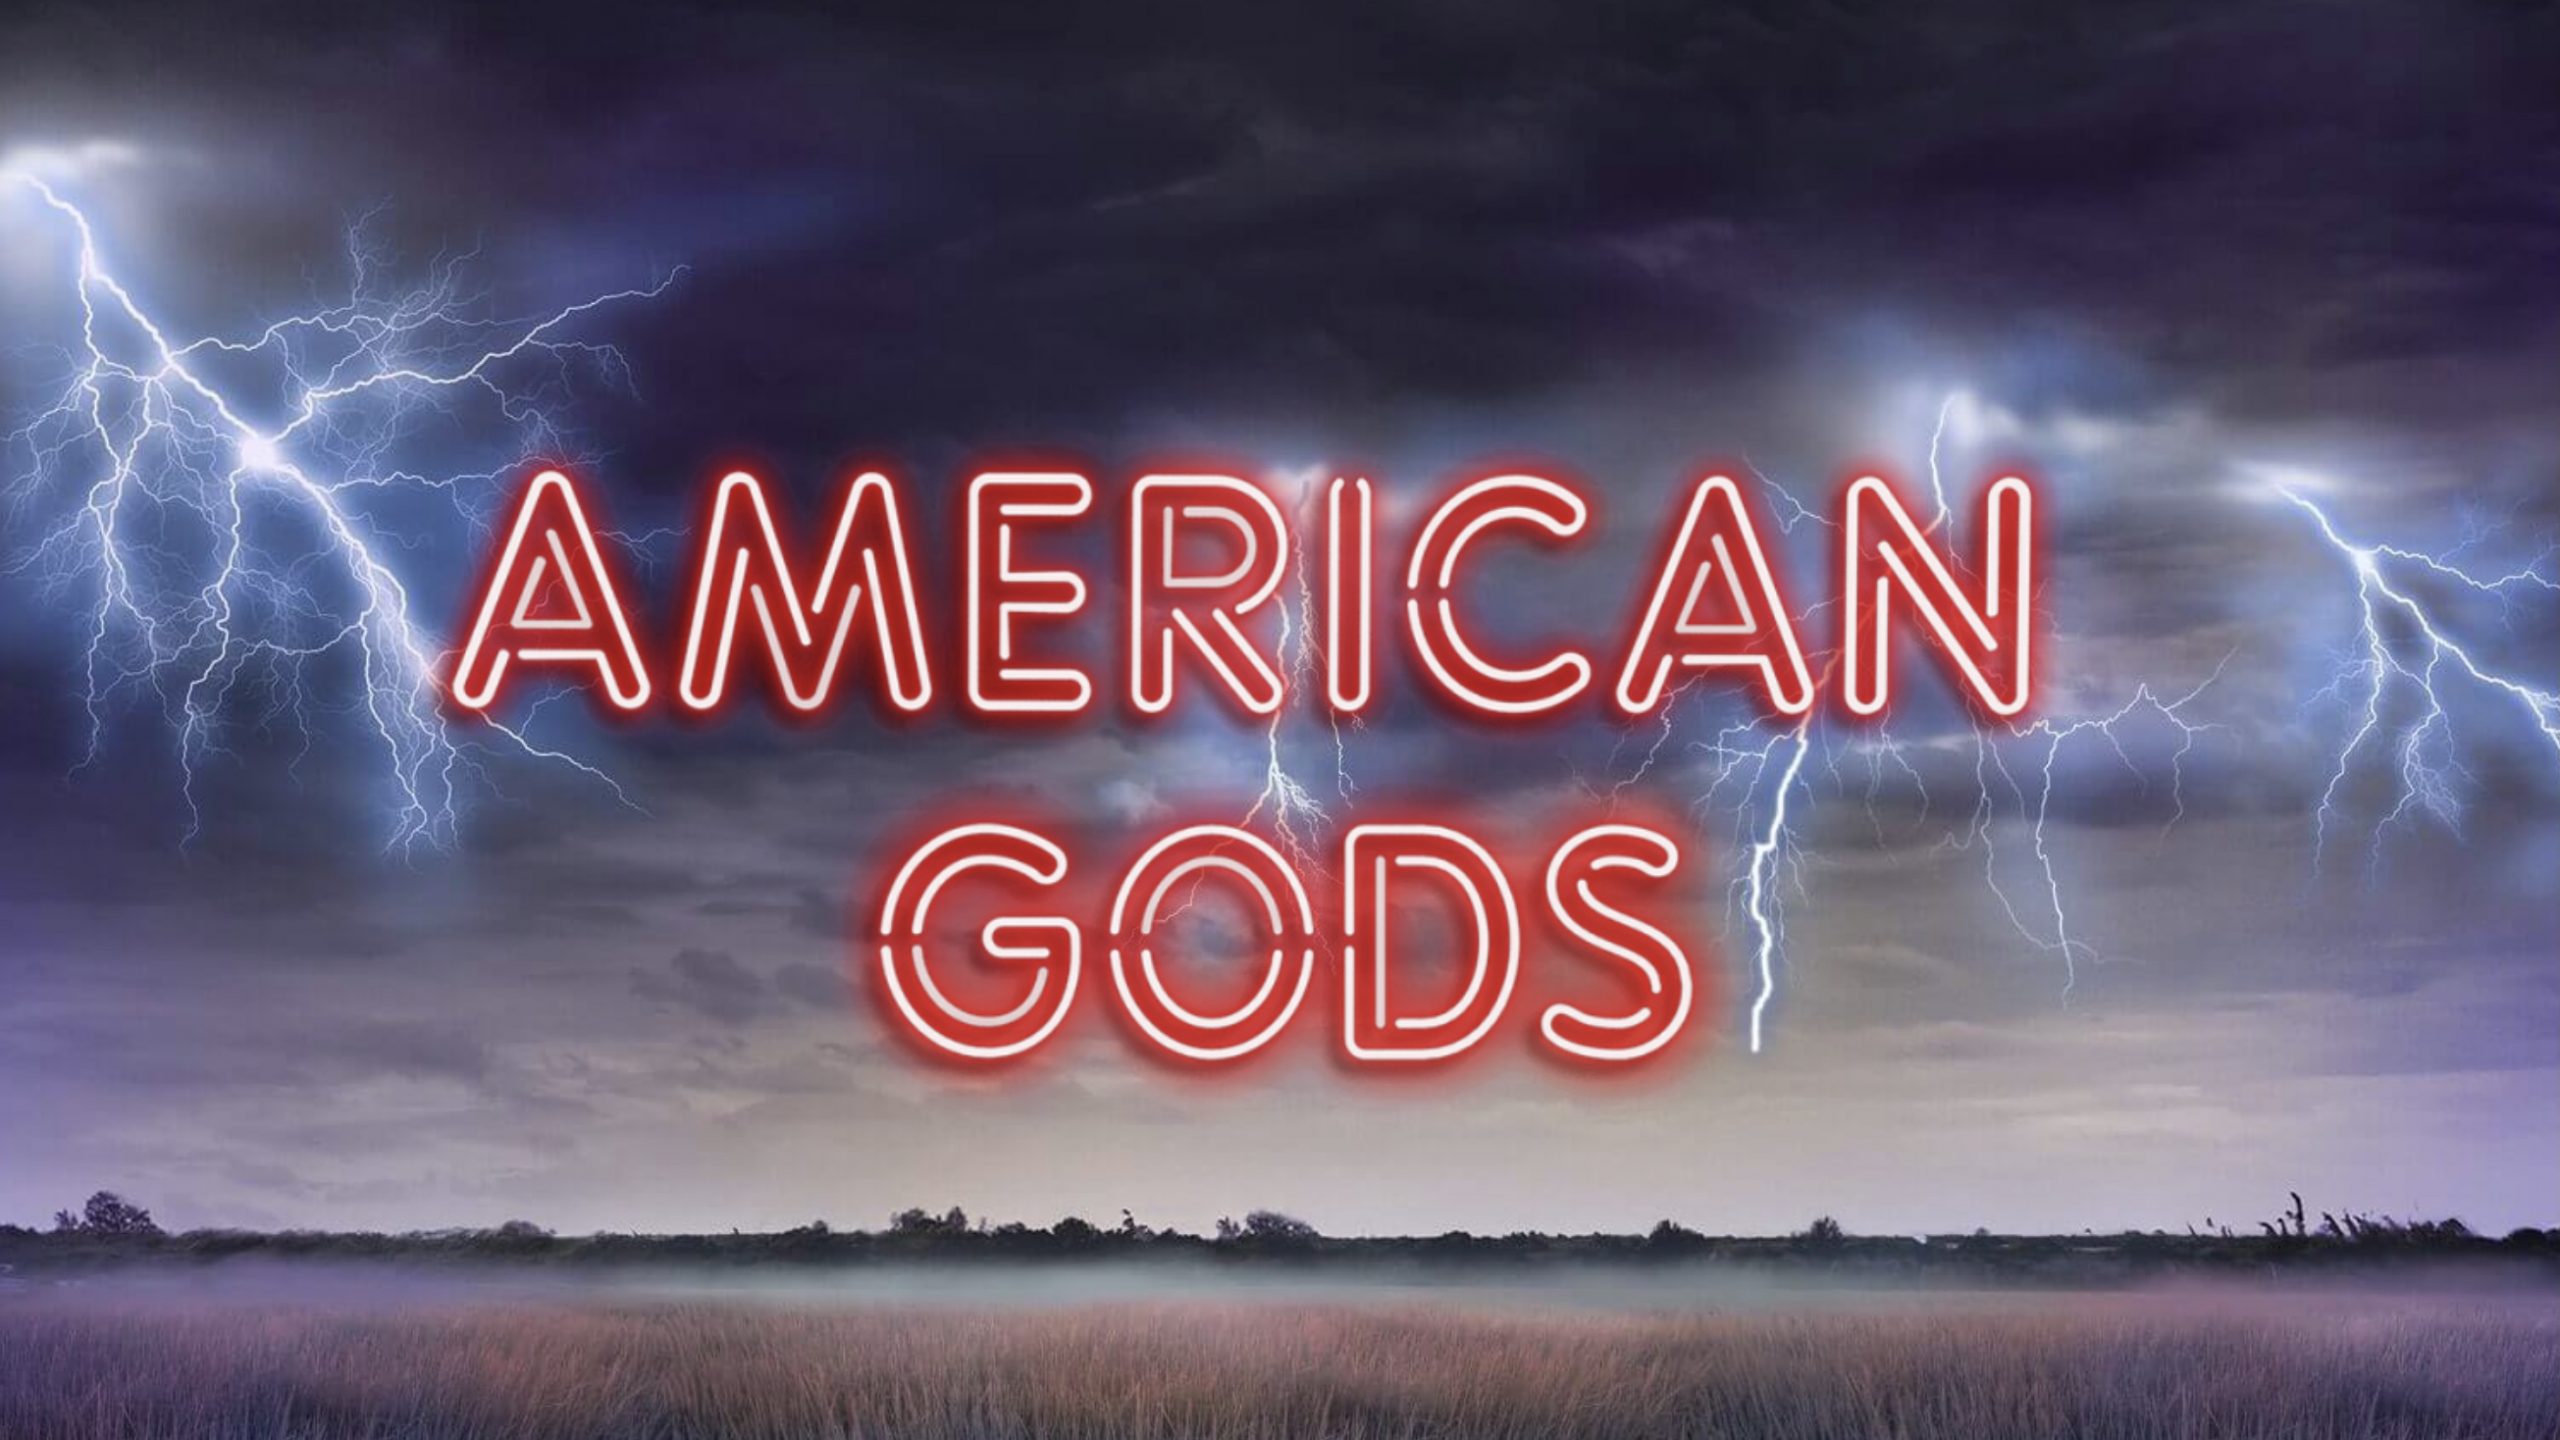 American Gods is a 5x3-5, 20-40 payline video slot that comes with a maximum win potential of up to x4,800 the bet.